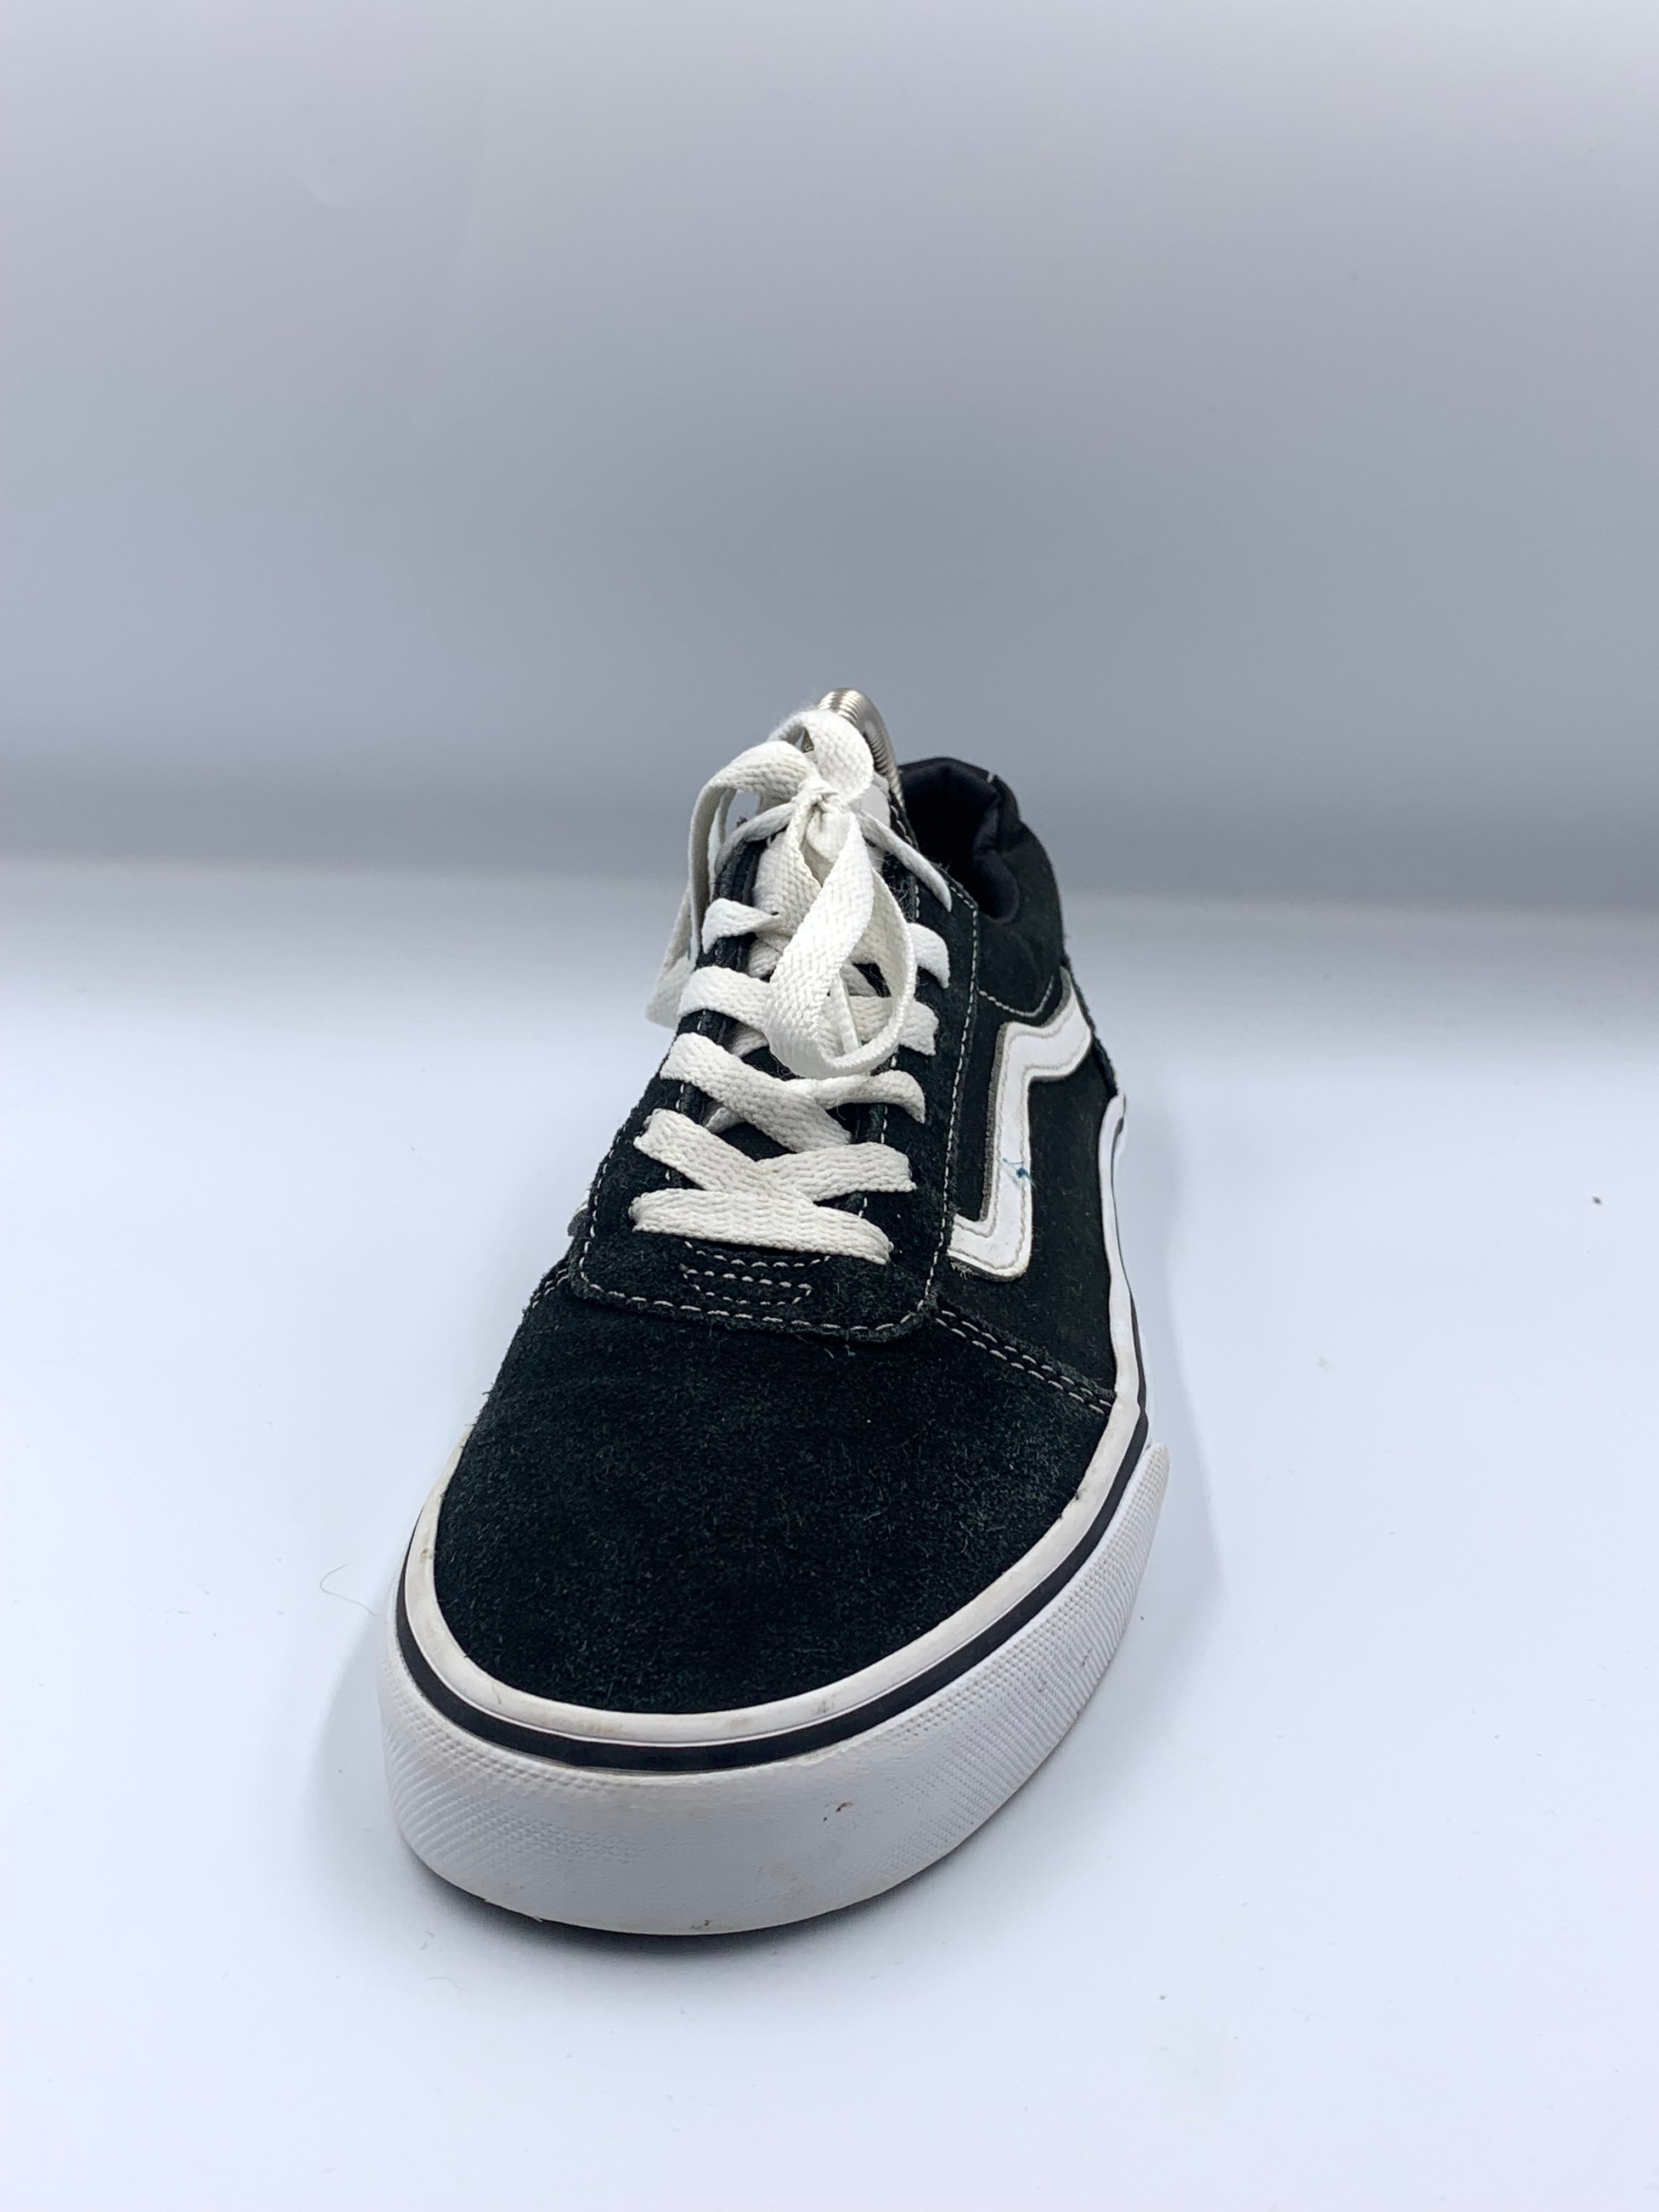 Vans Of The Wall Brand Sports Black Running For Women Shoes